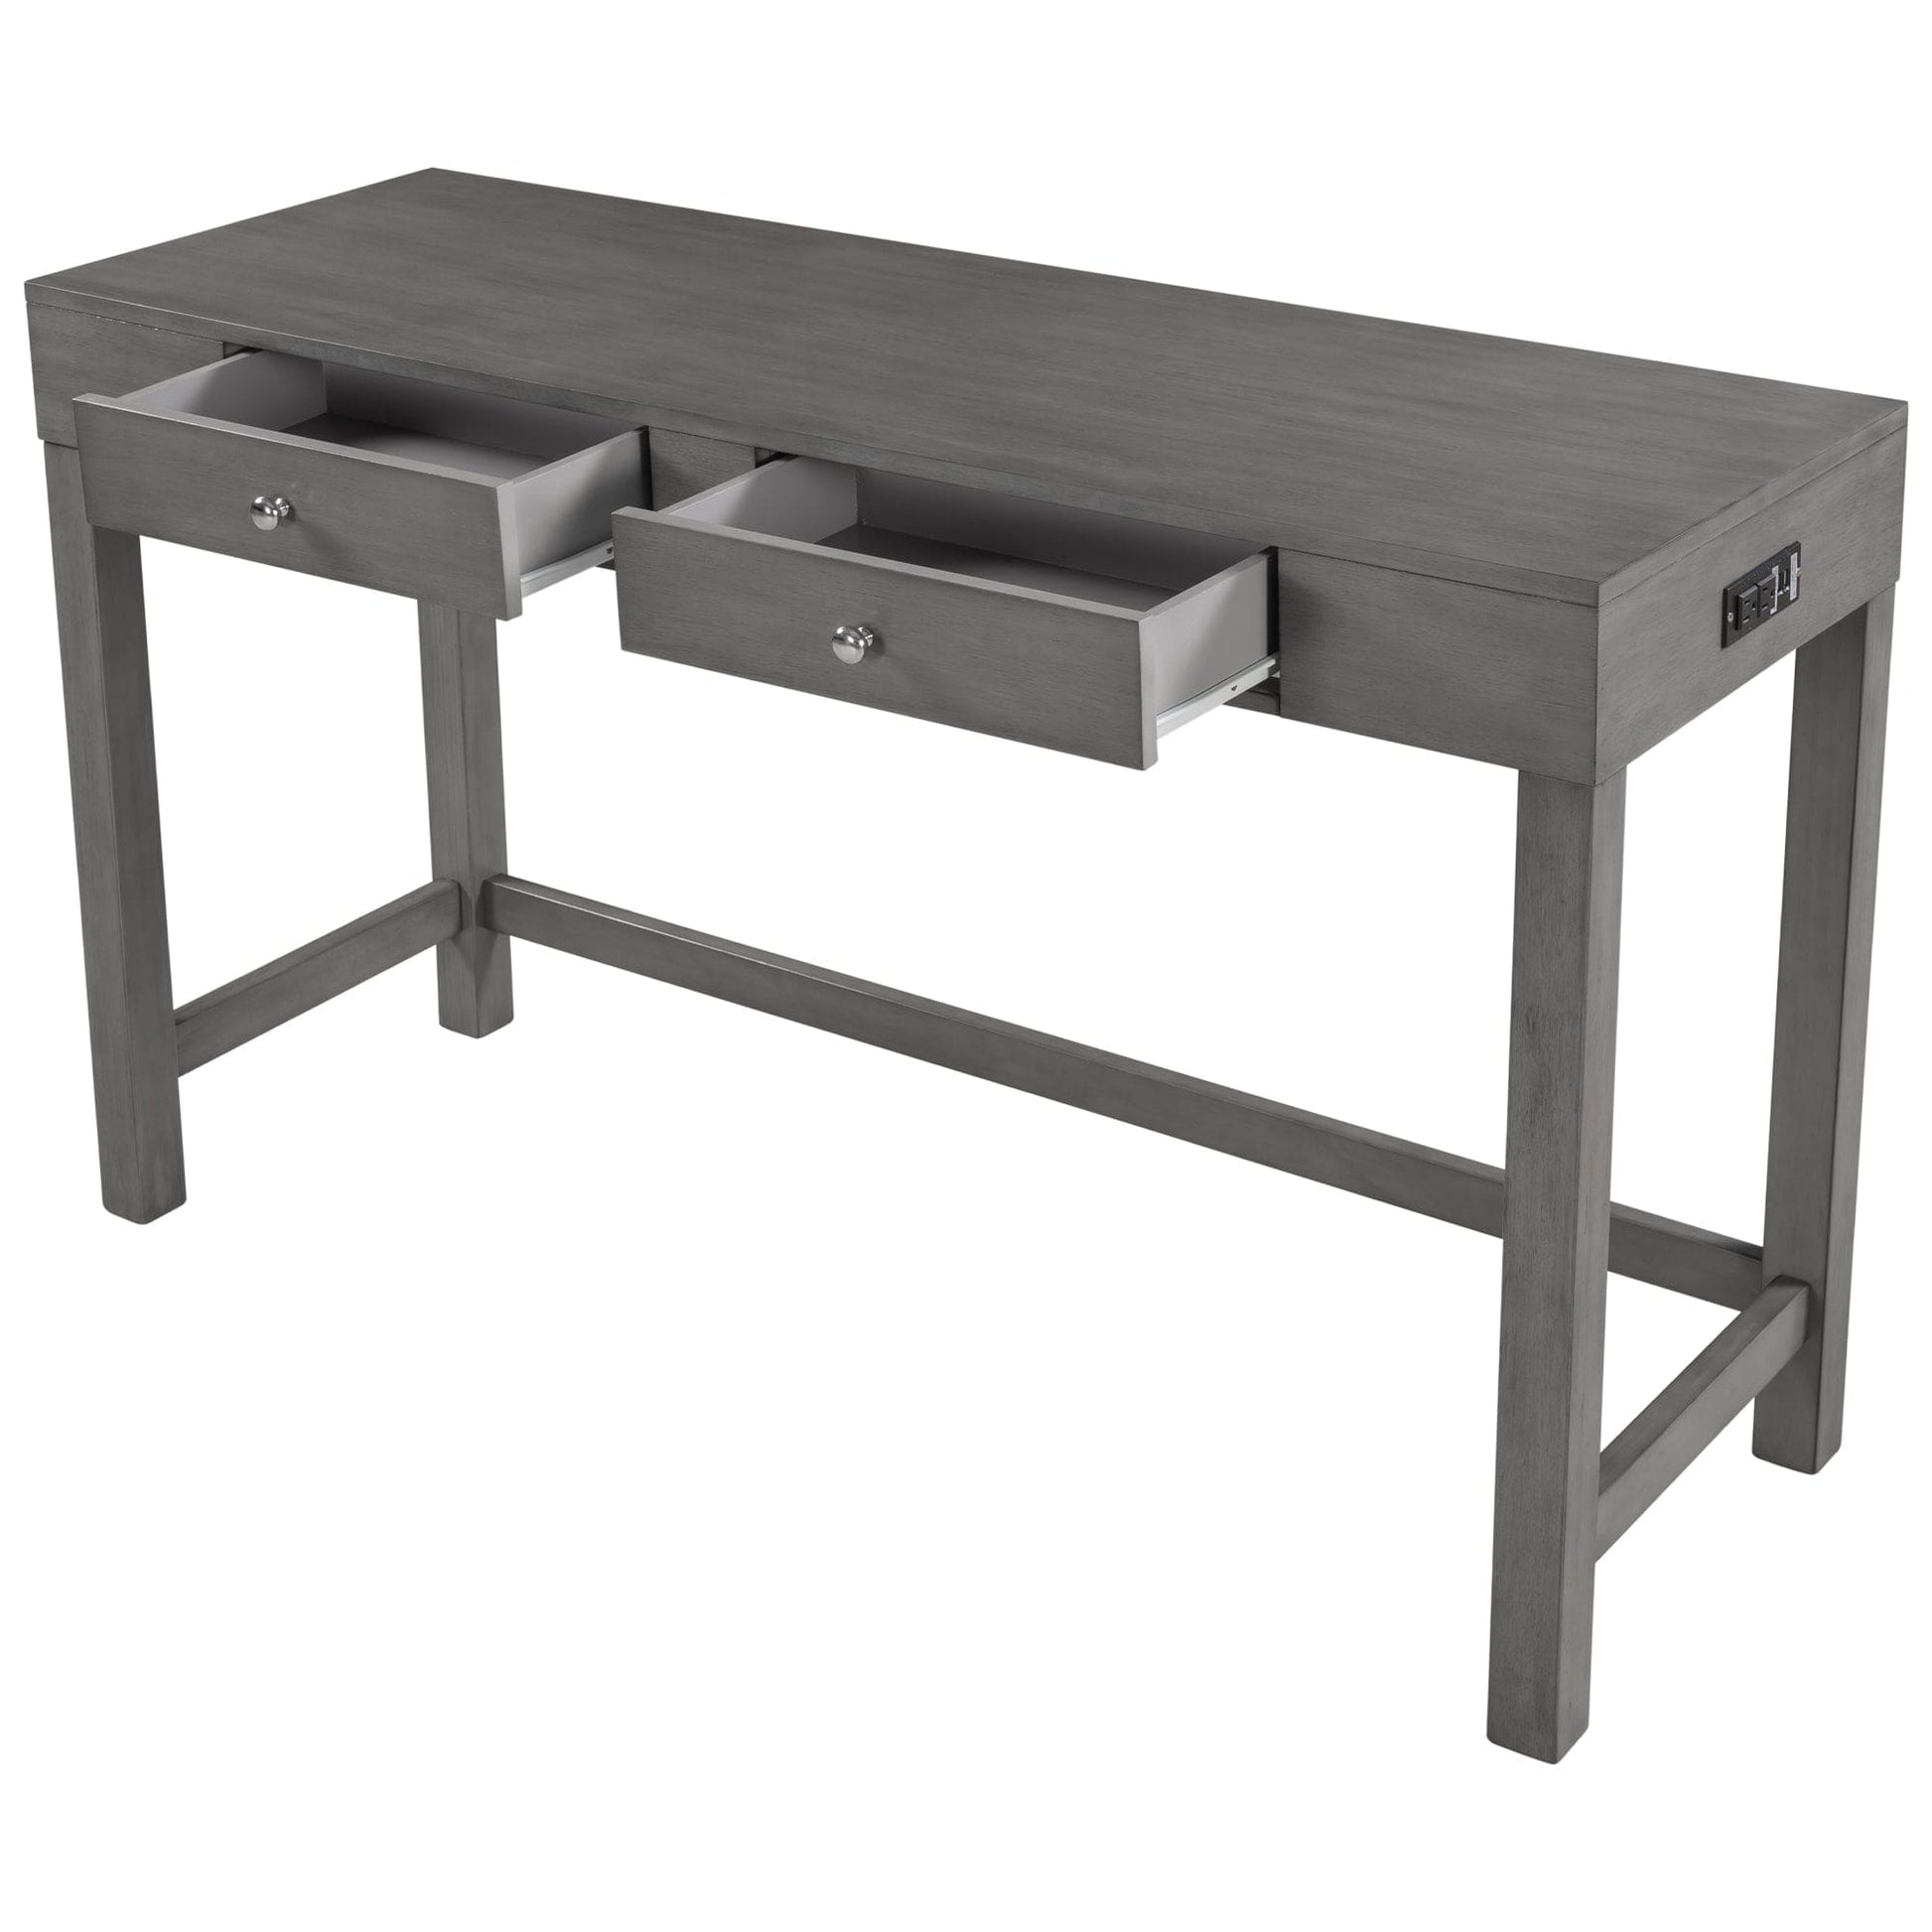 1st Choice Furniture Direct Counter Dining Set w/Stools 1st Choice 4-Piece Gray Counter Height Table Set w/ Padded Stools